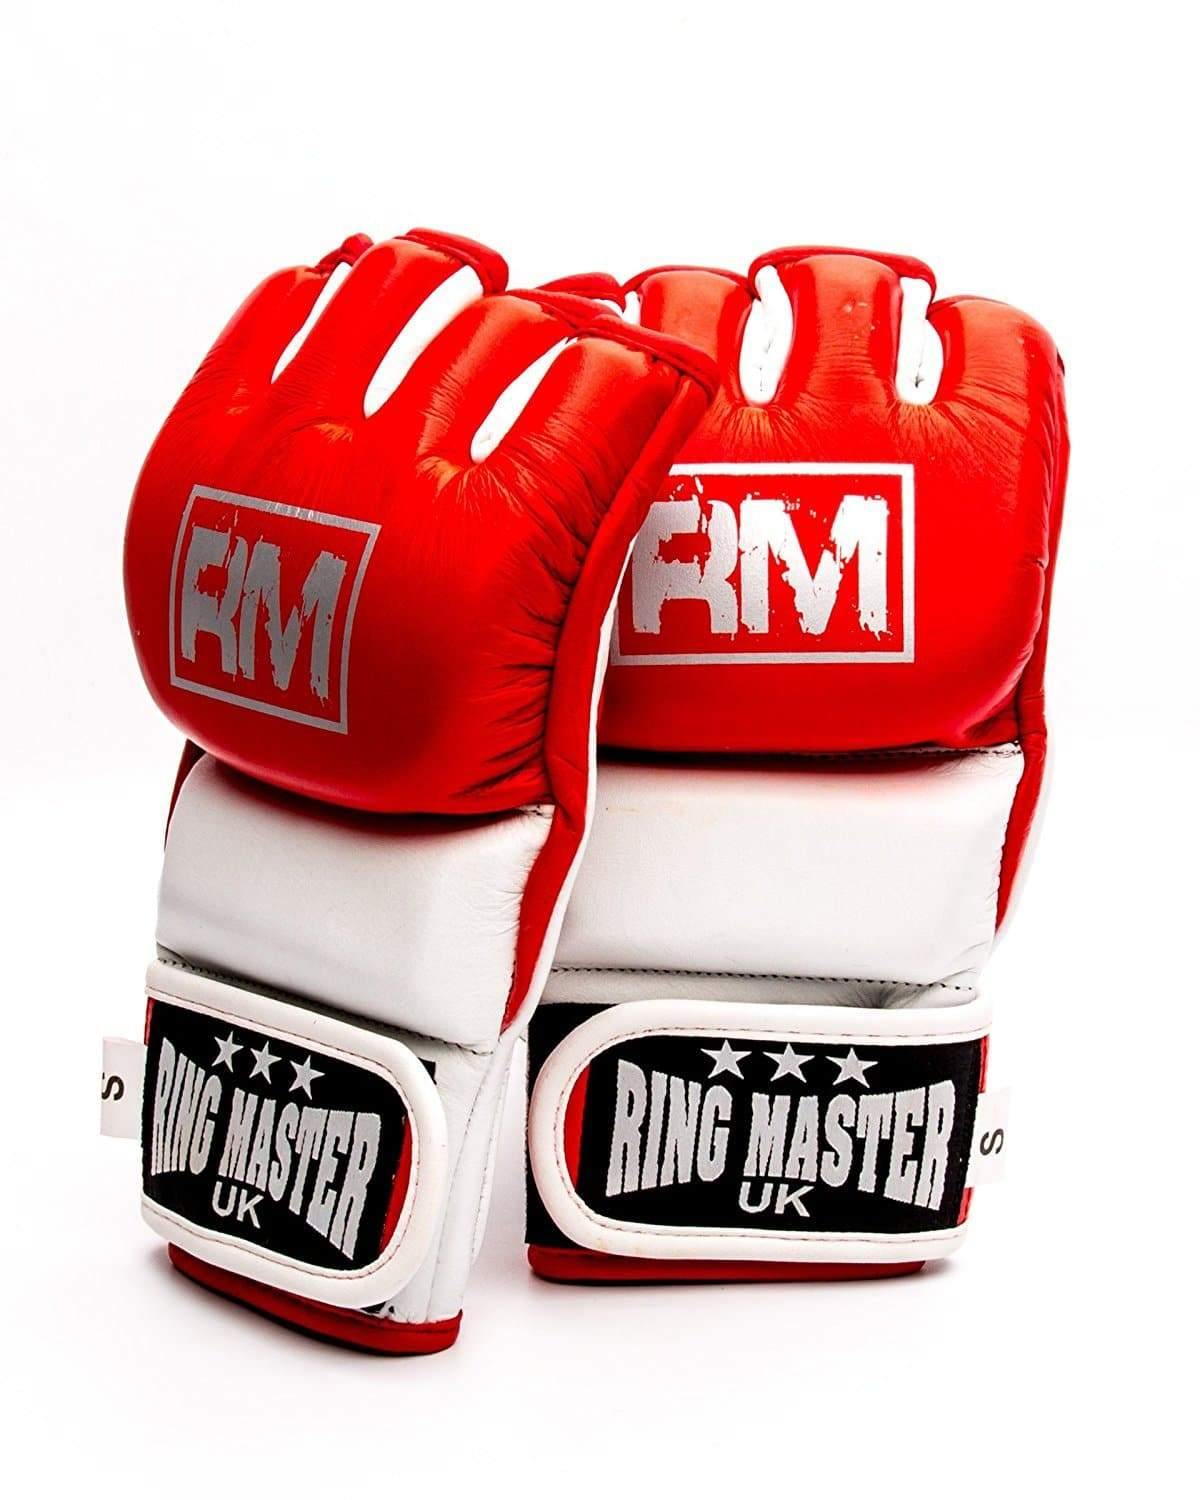 RingMaster Sports MMA Gloves Genuine Leather Red and White Image 1